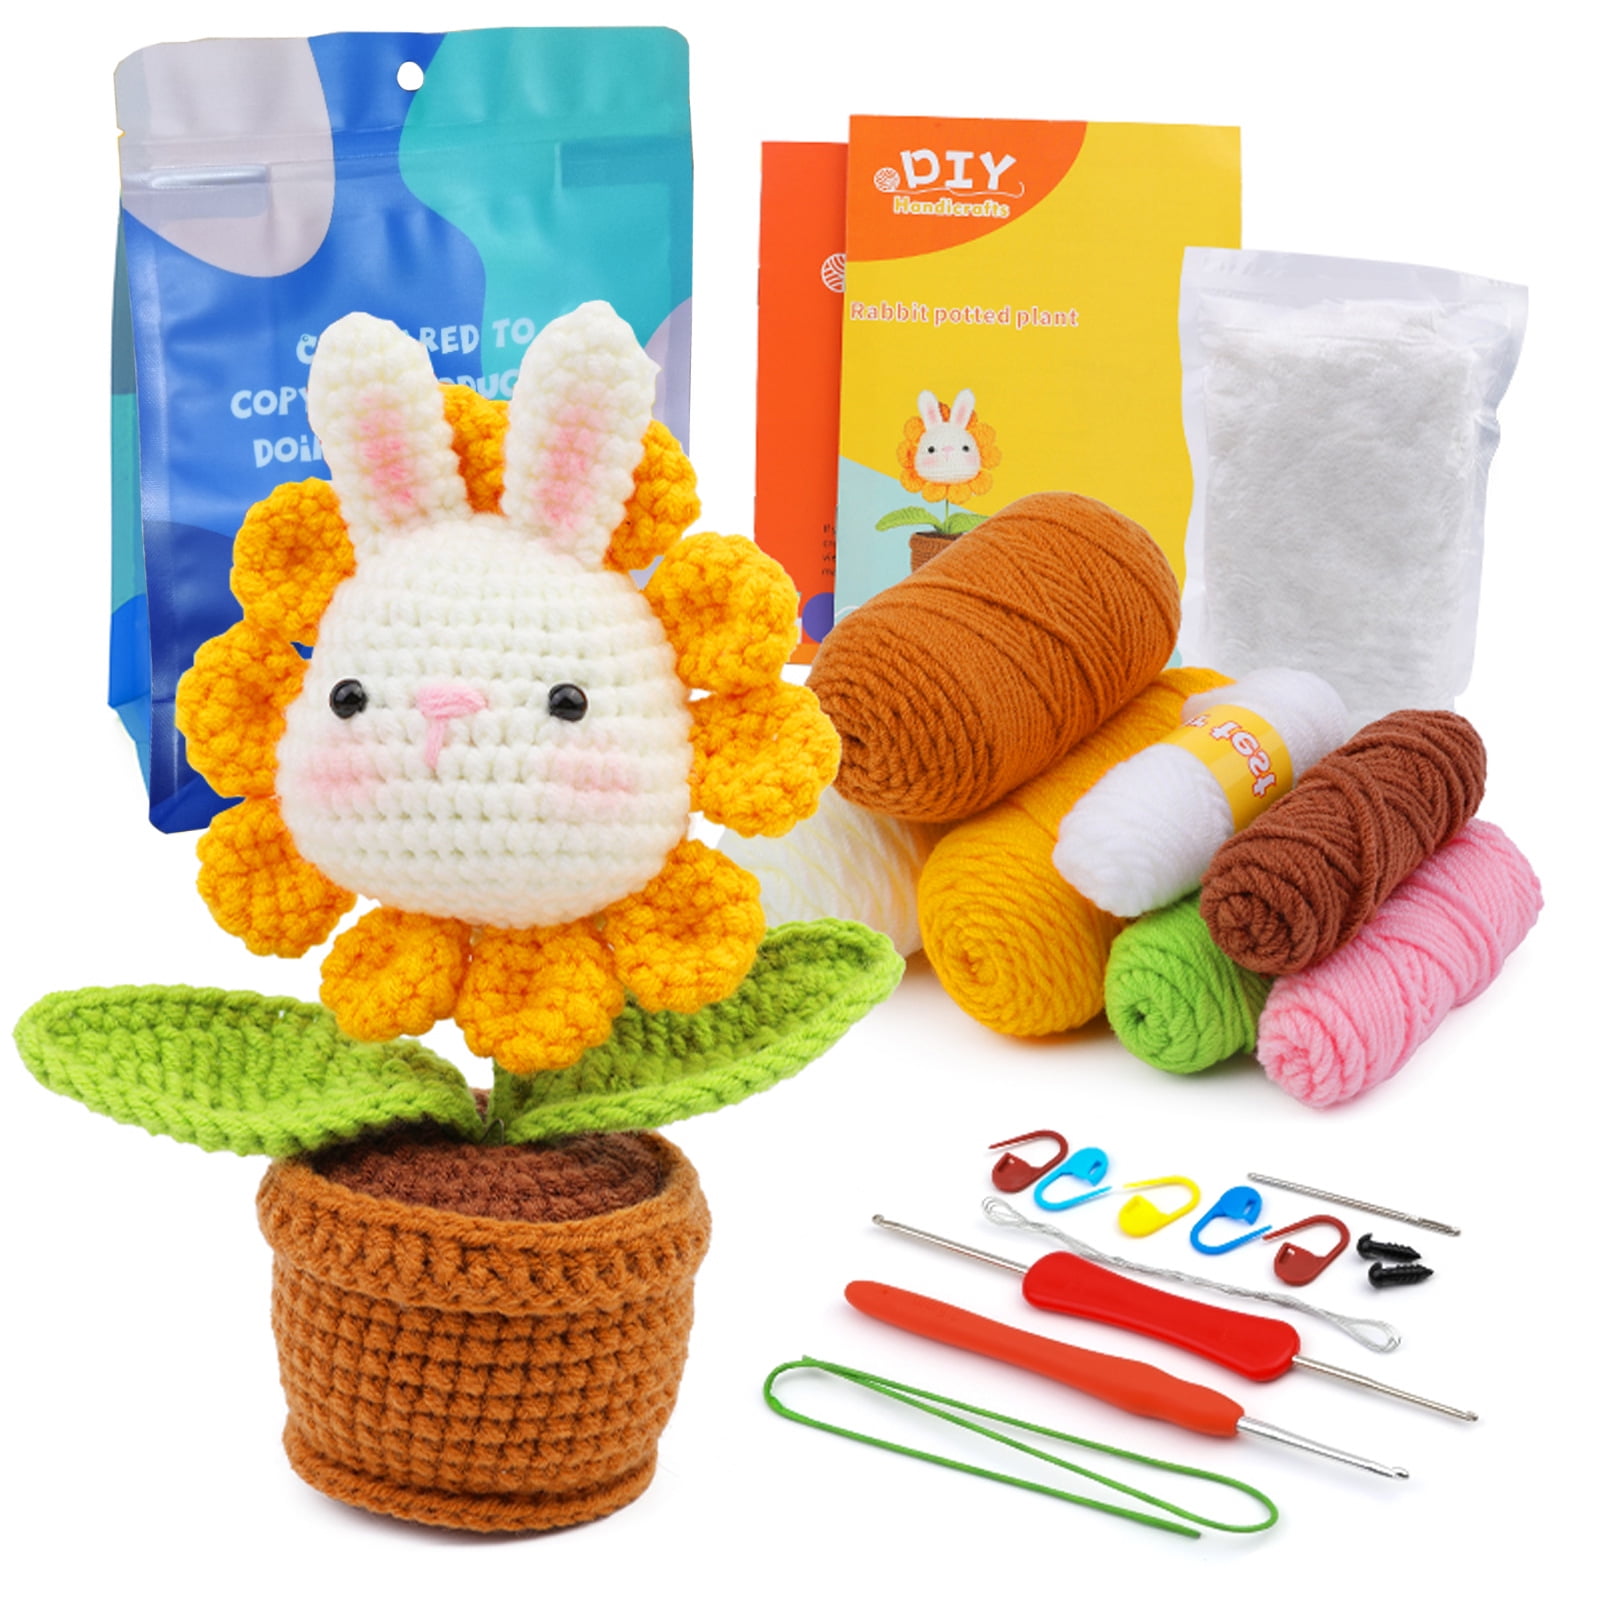 Crochetta Crochet Kit for Beginners, Amigurumi Crocheting Animals Kits w  Step-by-Step Video Tutorials, Knitting Starter Pack for Adults and Kids